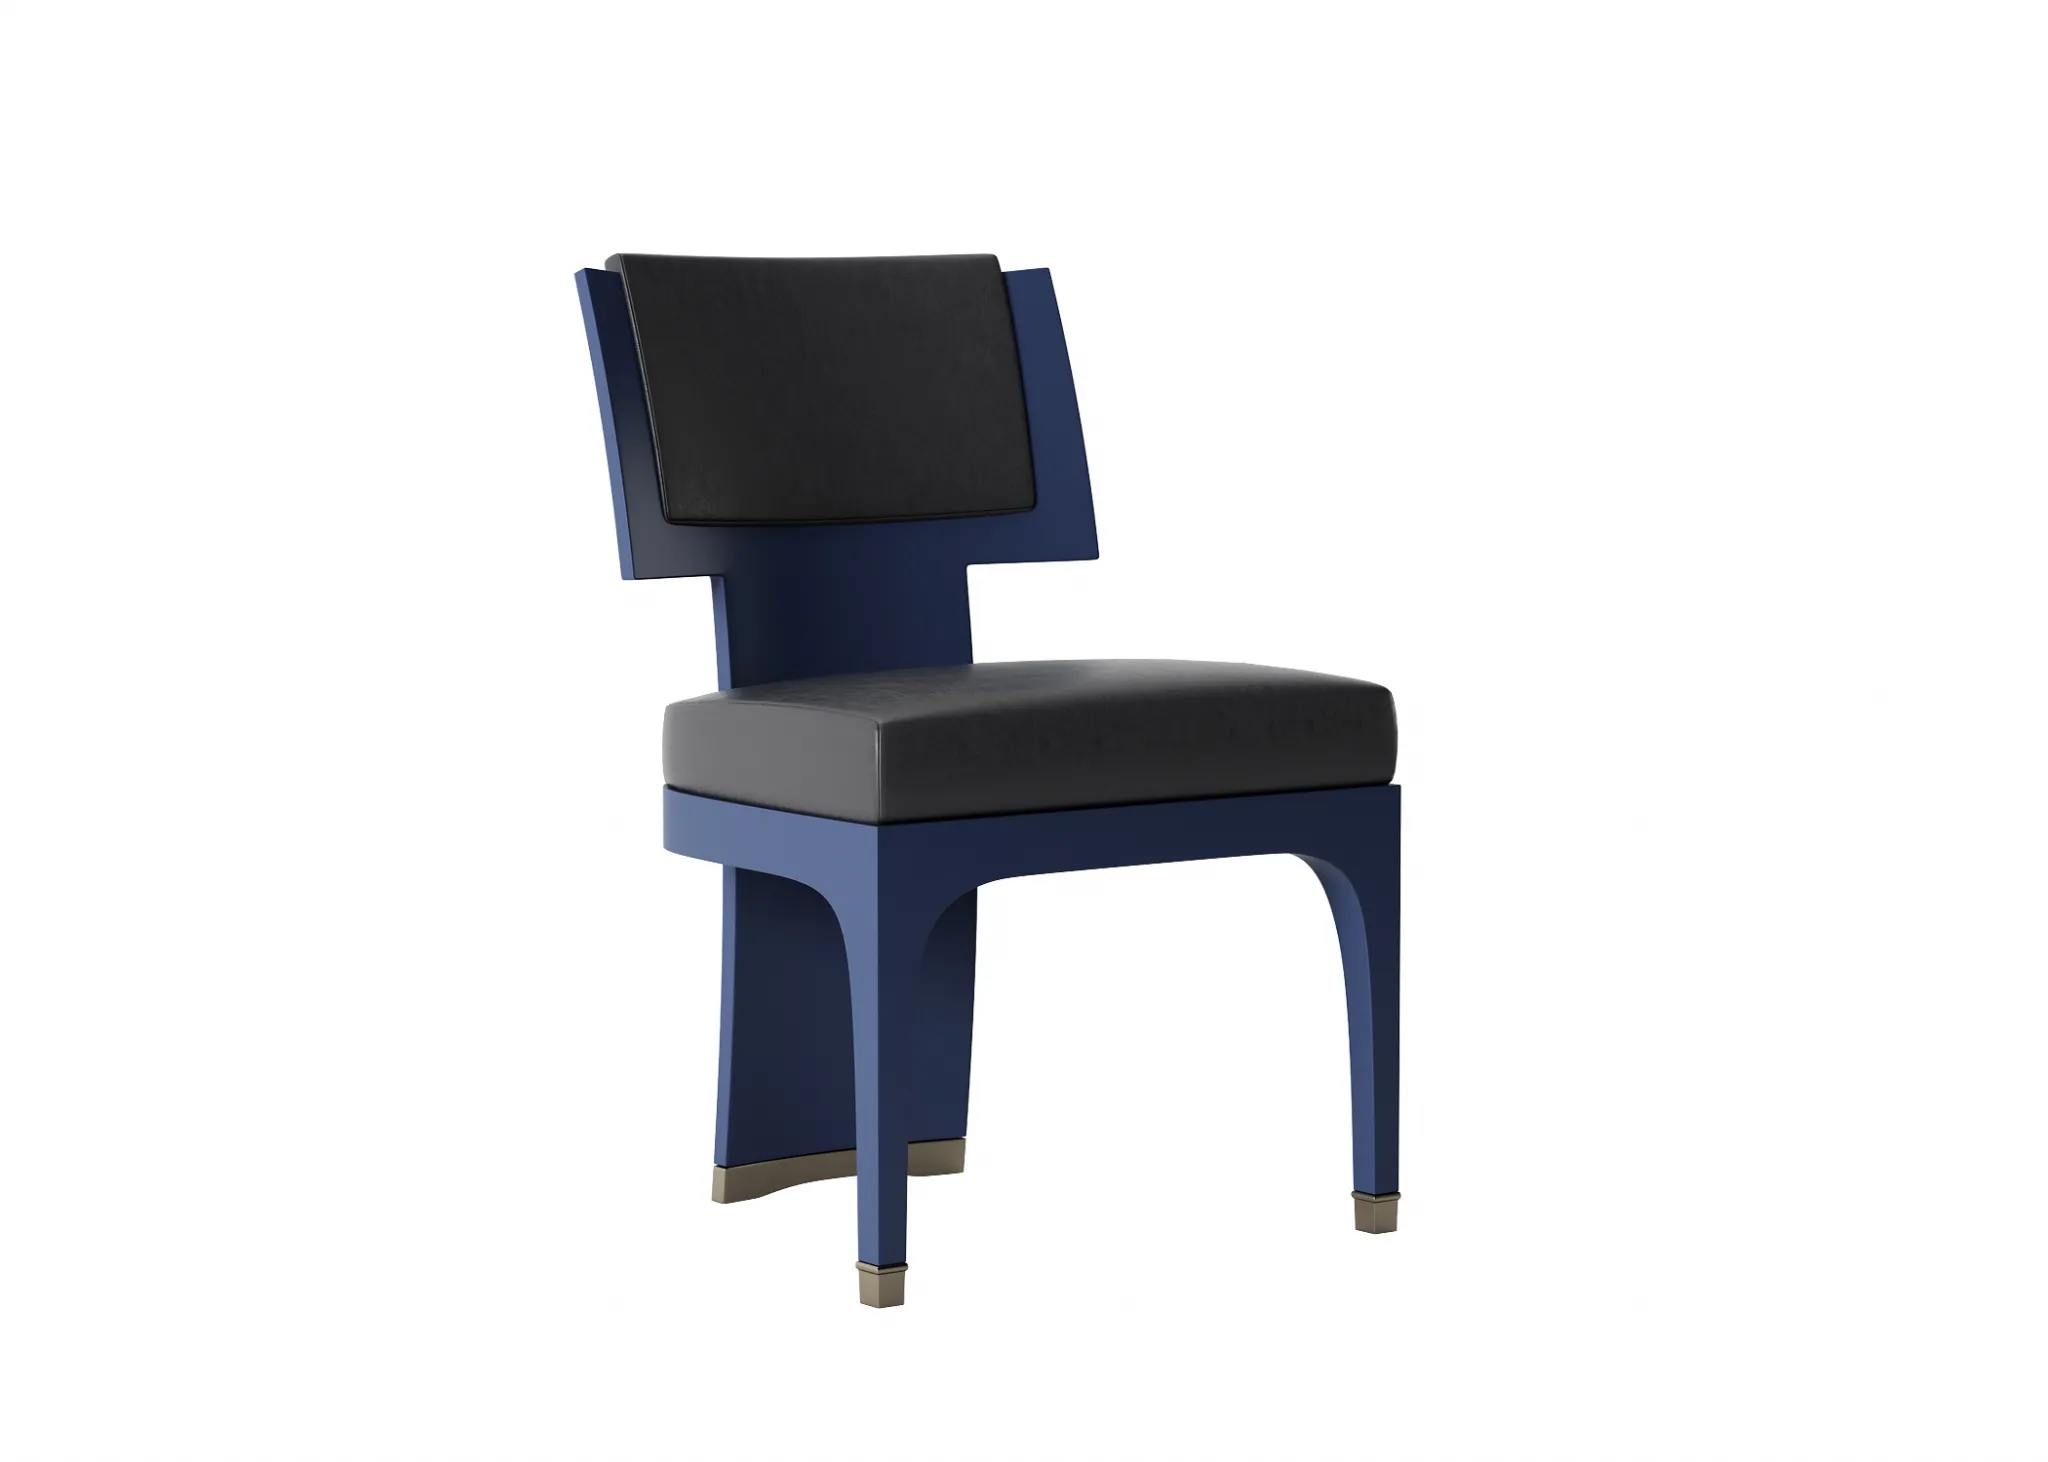 FURNITURE 3D MODELS – CHAIRS – 0306